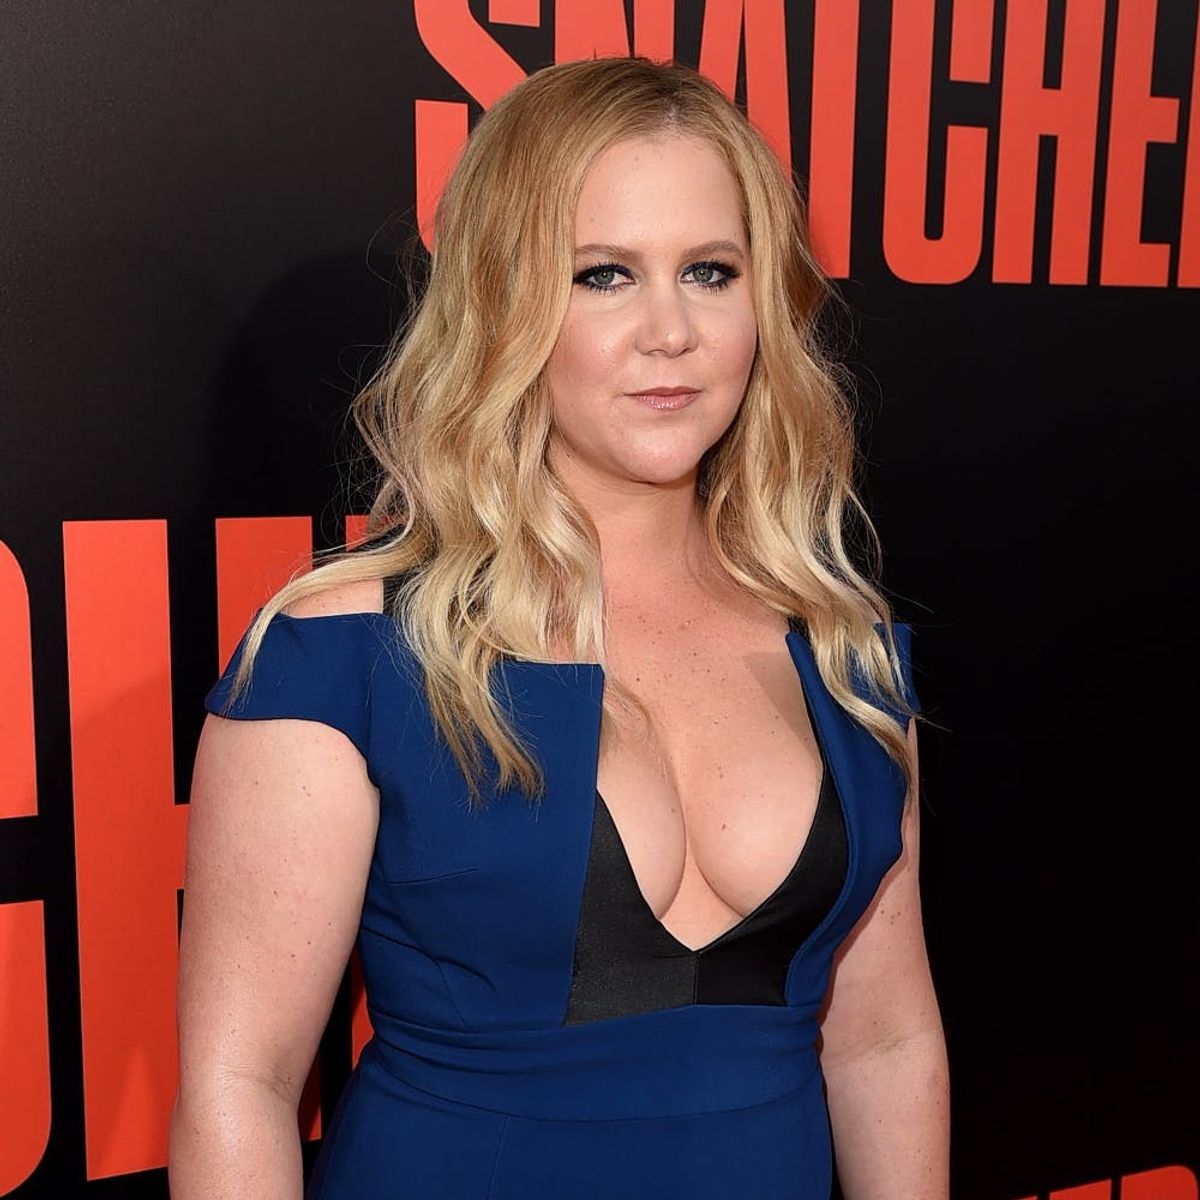 Amy Schumer Opens Up About Her Breakup and Jokes About the “New Dude” She’s Seeing